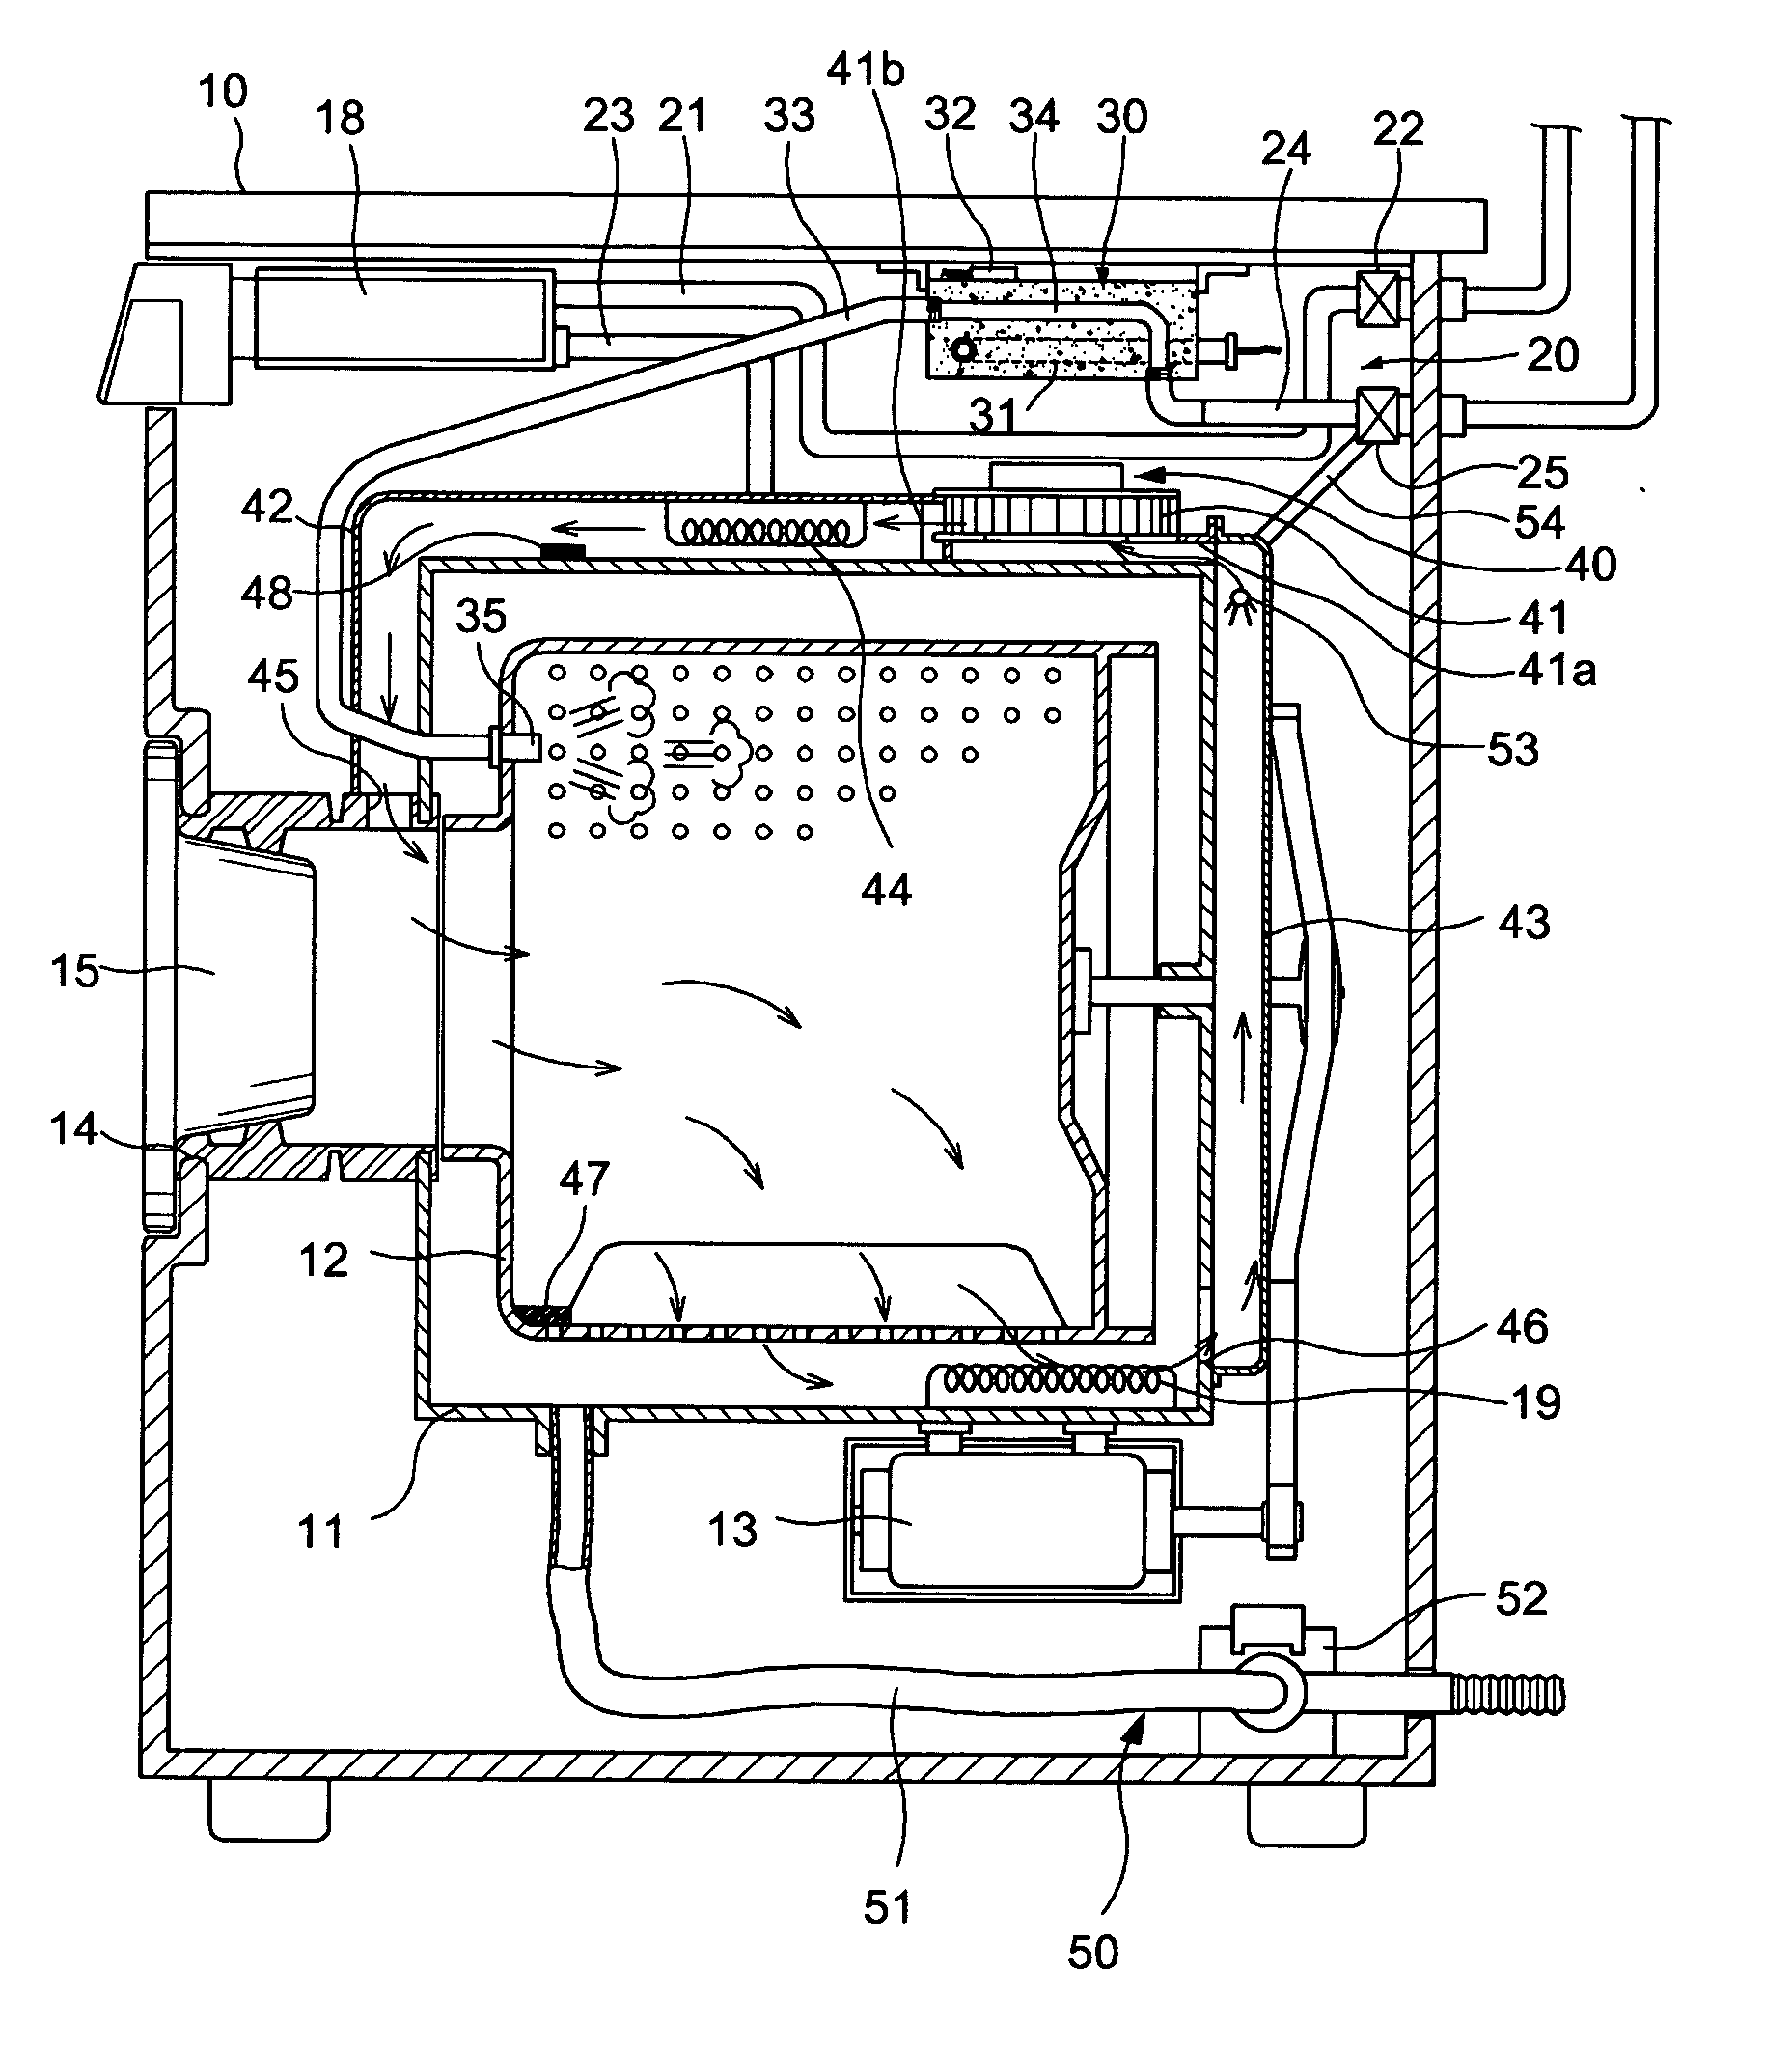 Apparatus and method for eliminating wrinkles in clothes